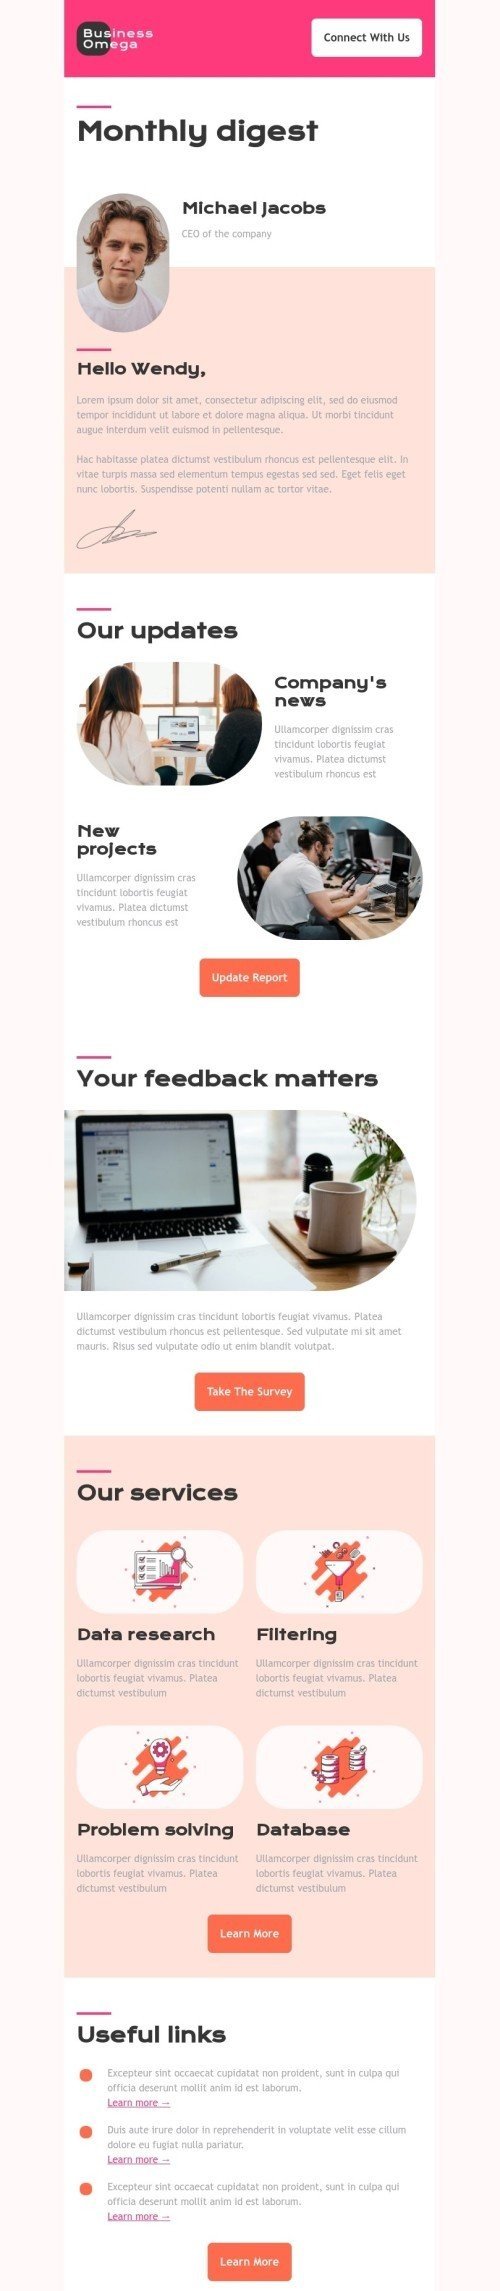 Promo email template «News from Omega» for business industry desktop view